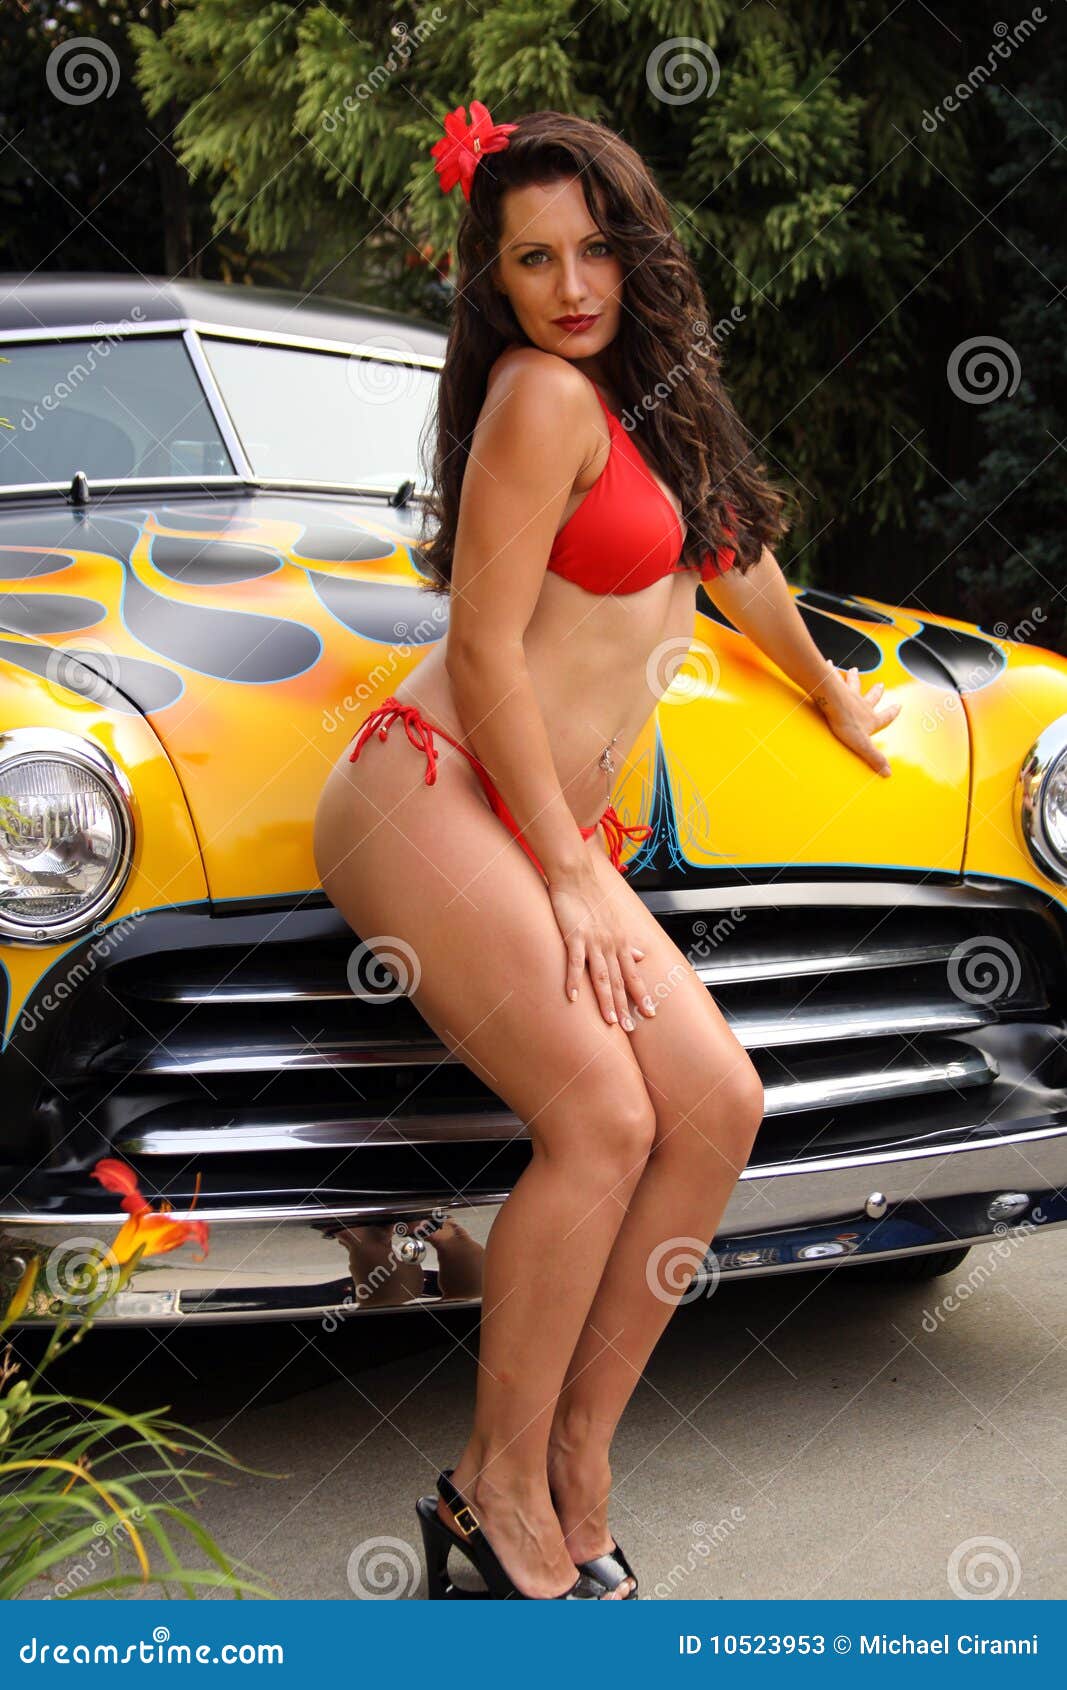 bhaumik maru recommends sexy hot rod girls pic